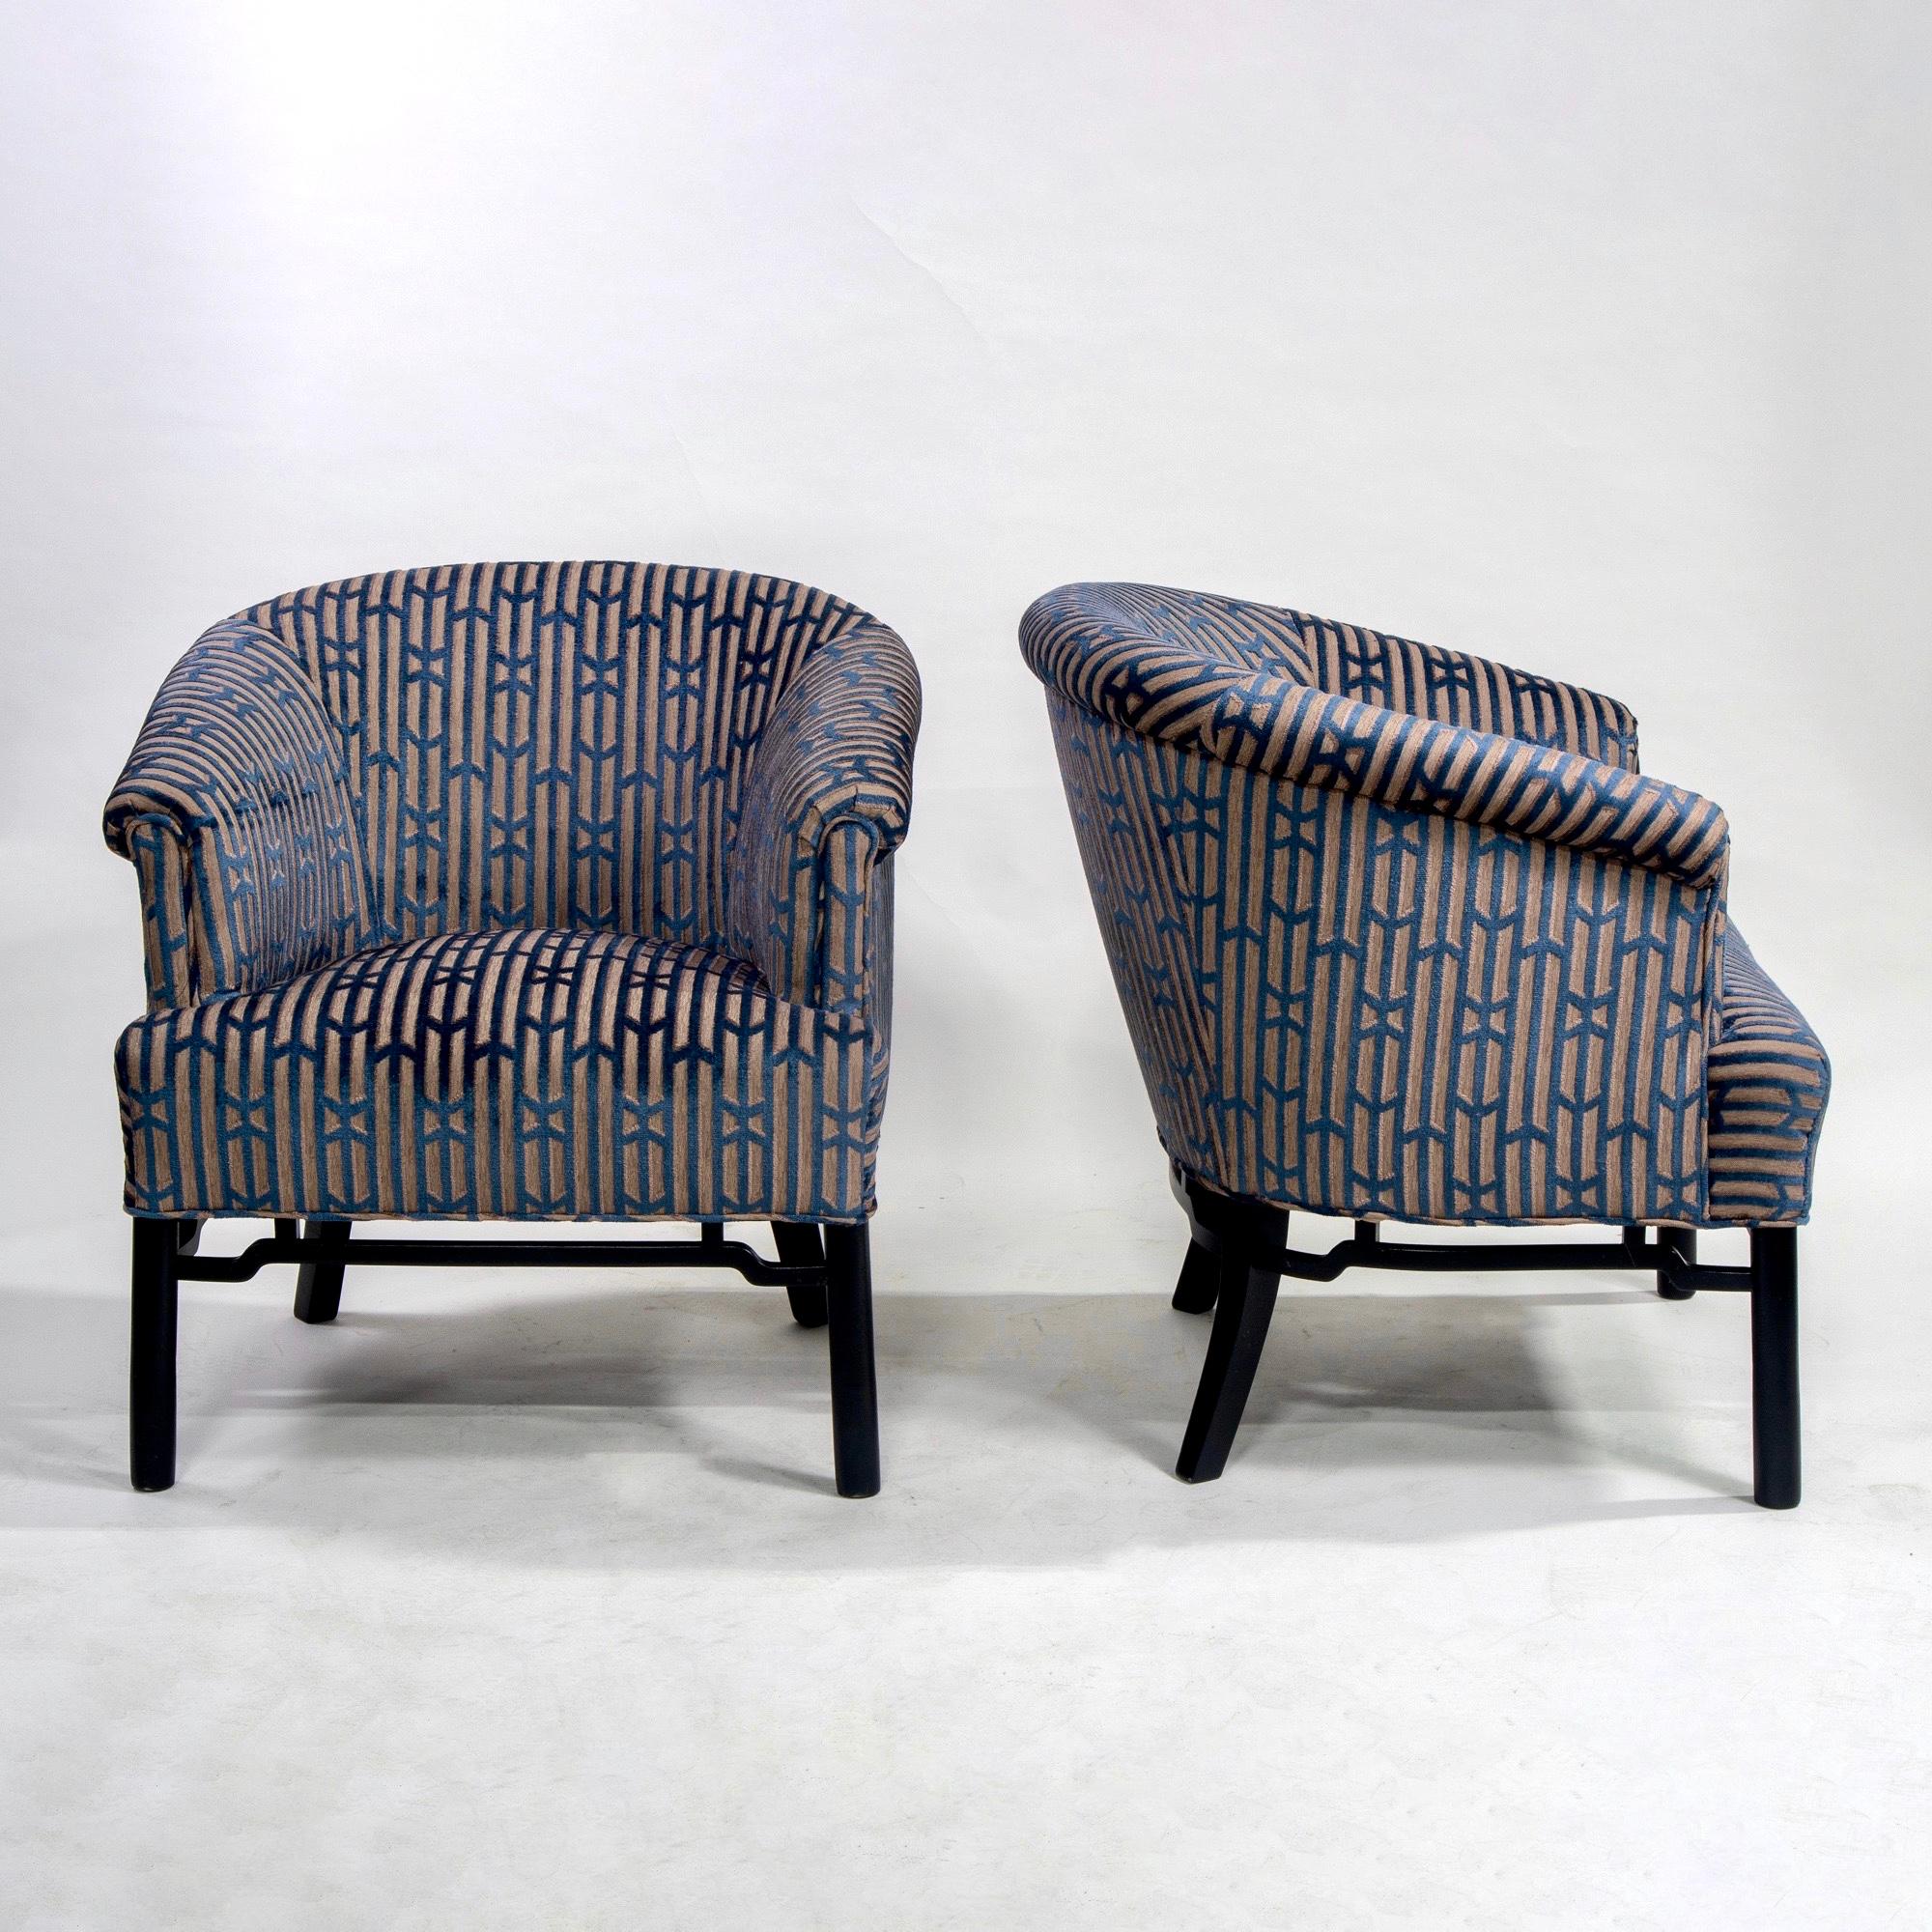 Pair circa 1960 Baker Furniture club chairs with new upholstery. Barrel back chairs with slender rolled arms and decorative, black frame and lattice work apron. Fabric is teal blue and taupe chain-pattern chenille. Sold and priced as a pair.